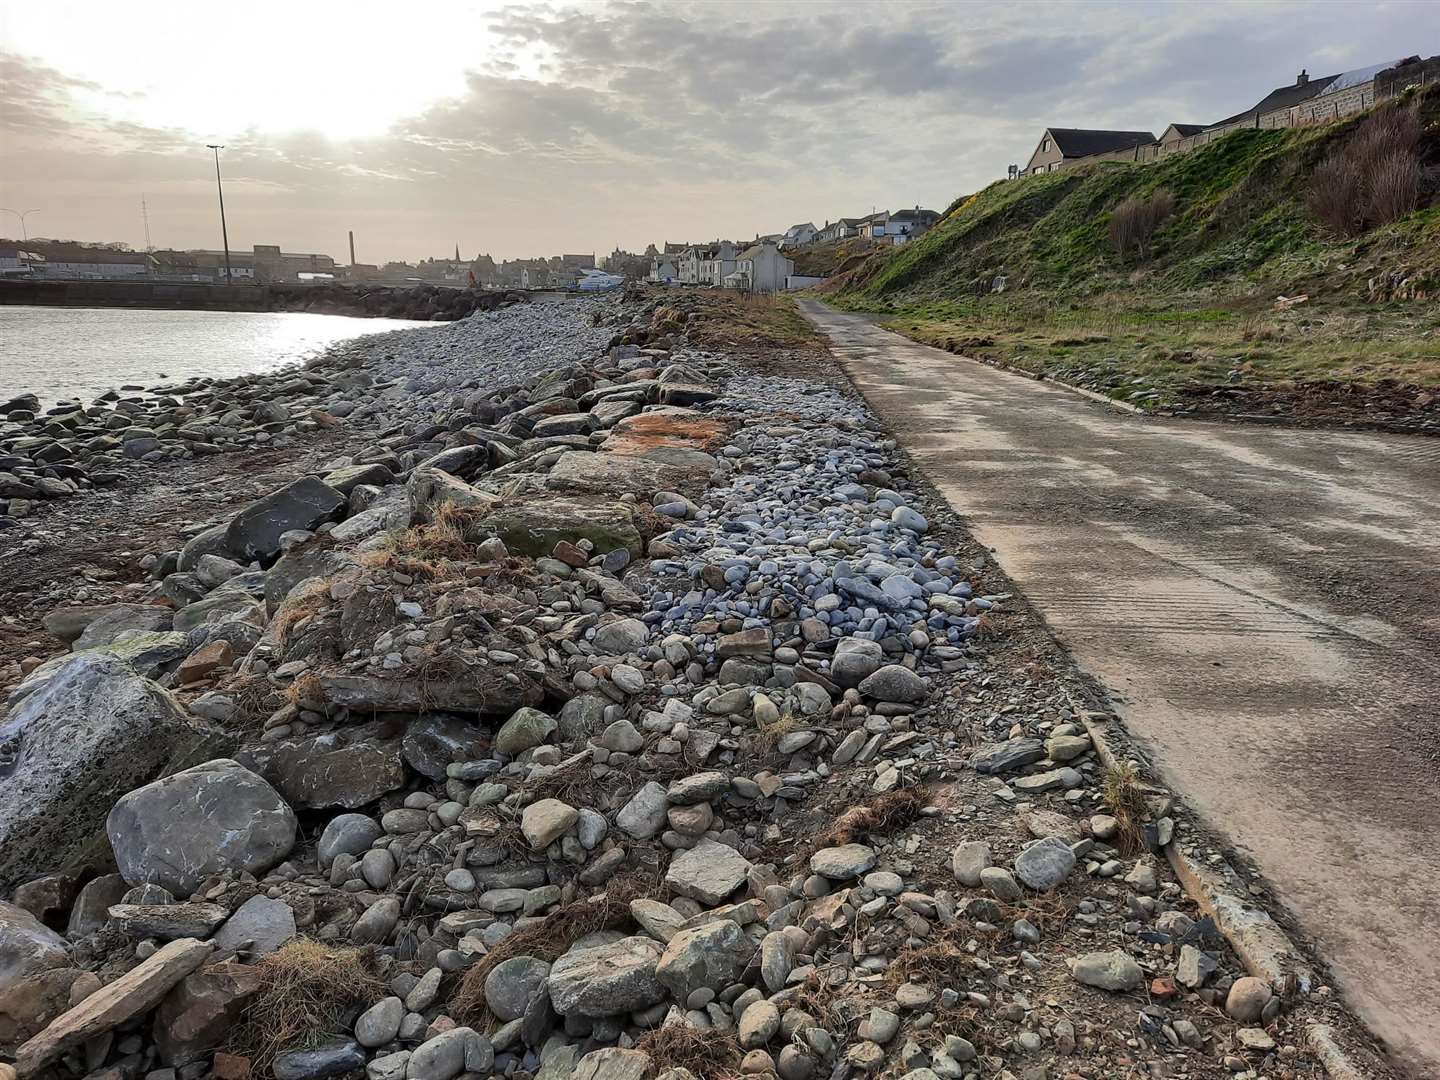 The access road beside Wick Bay has suffered from coastal erosion over the years, particularly when easterly gales have generated large waves. Large boulders were pulled up from the shore and strategically placed to prevent further damage. Picture: Wick Paths Group